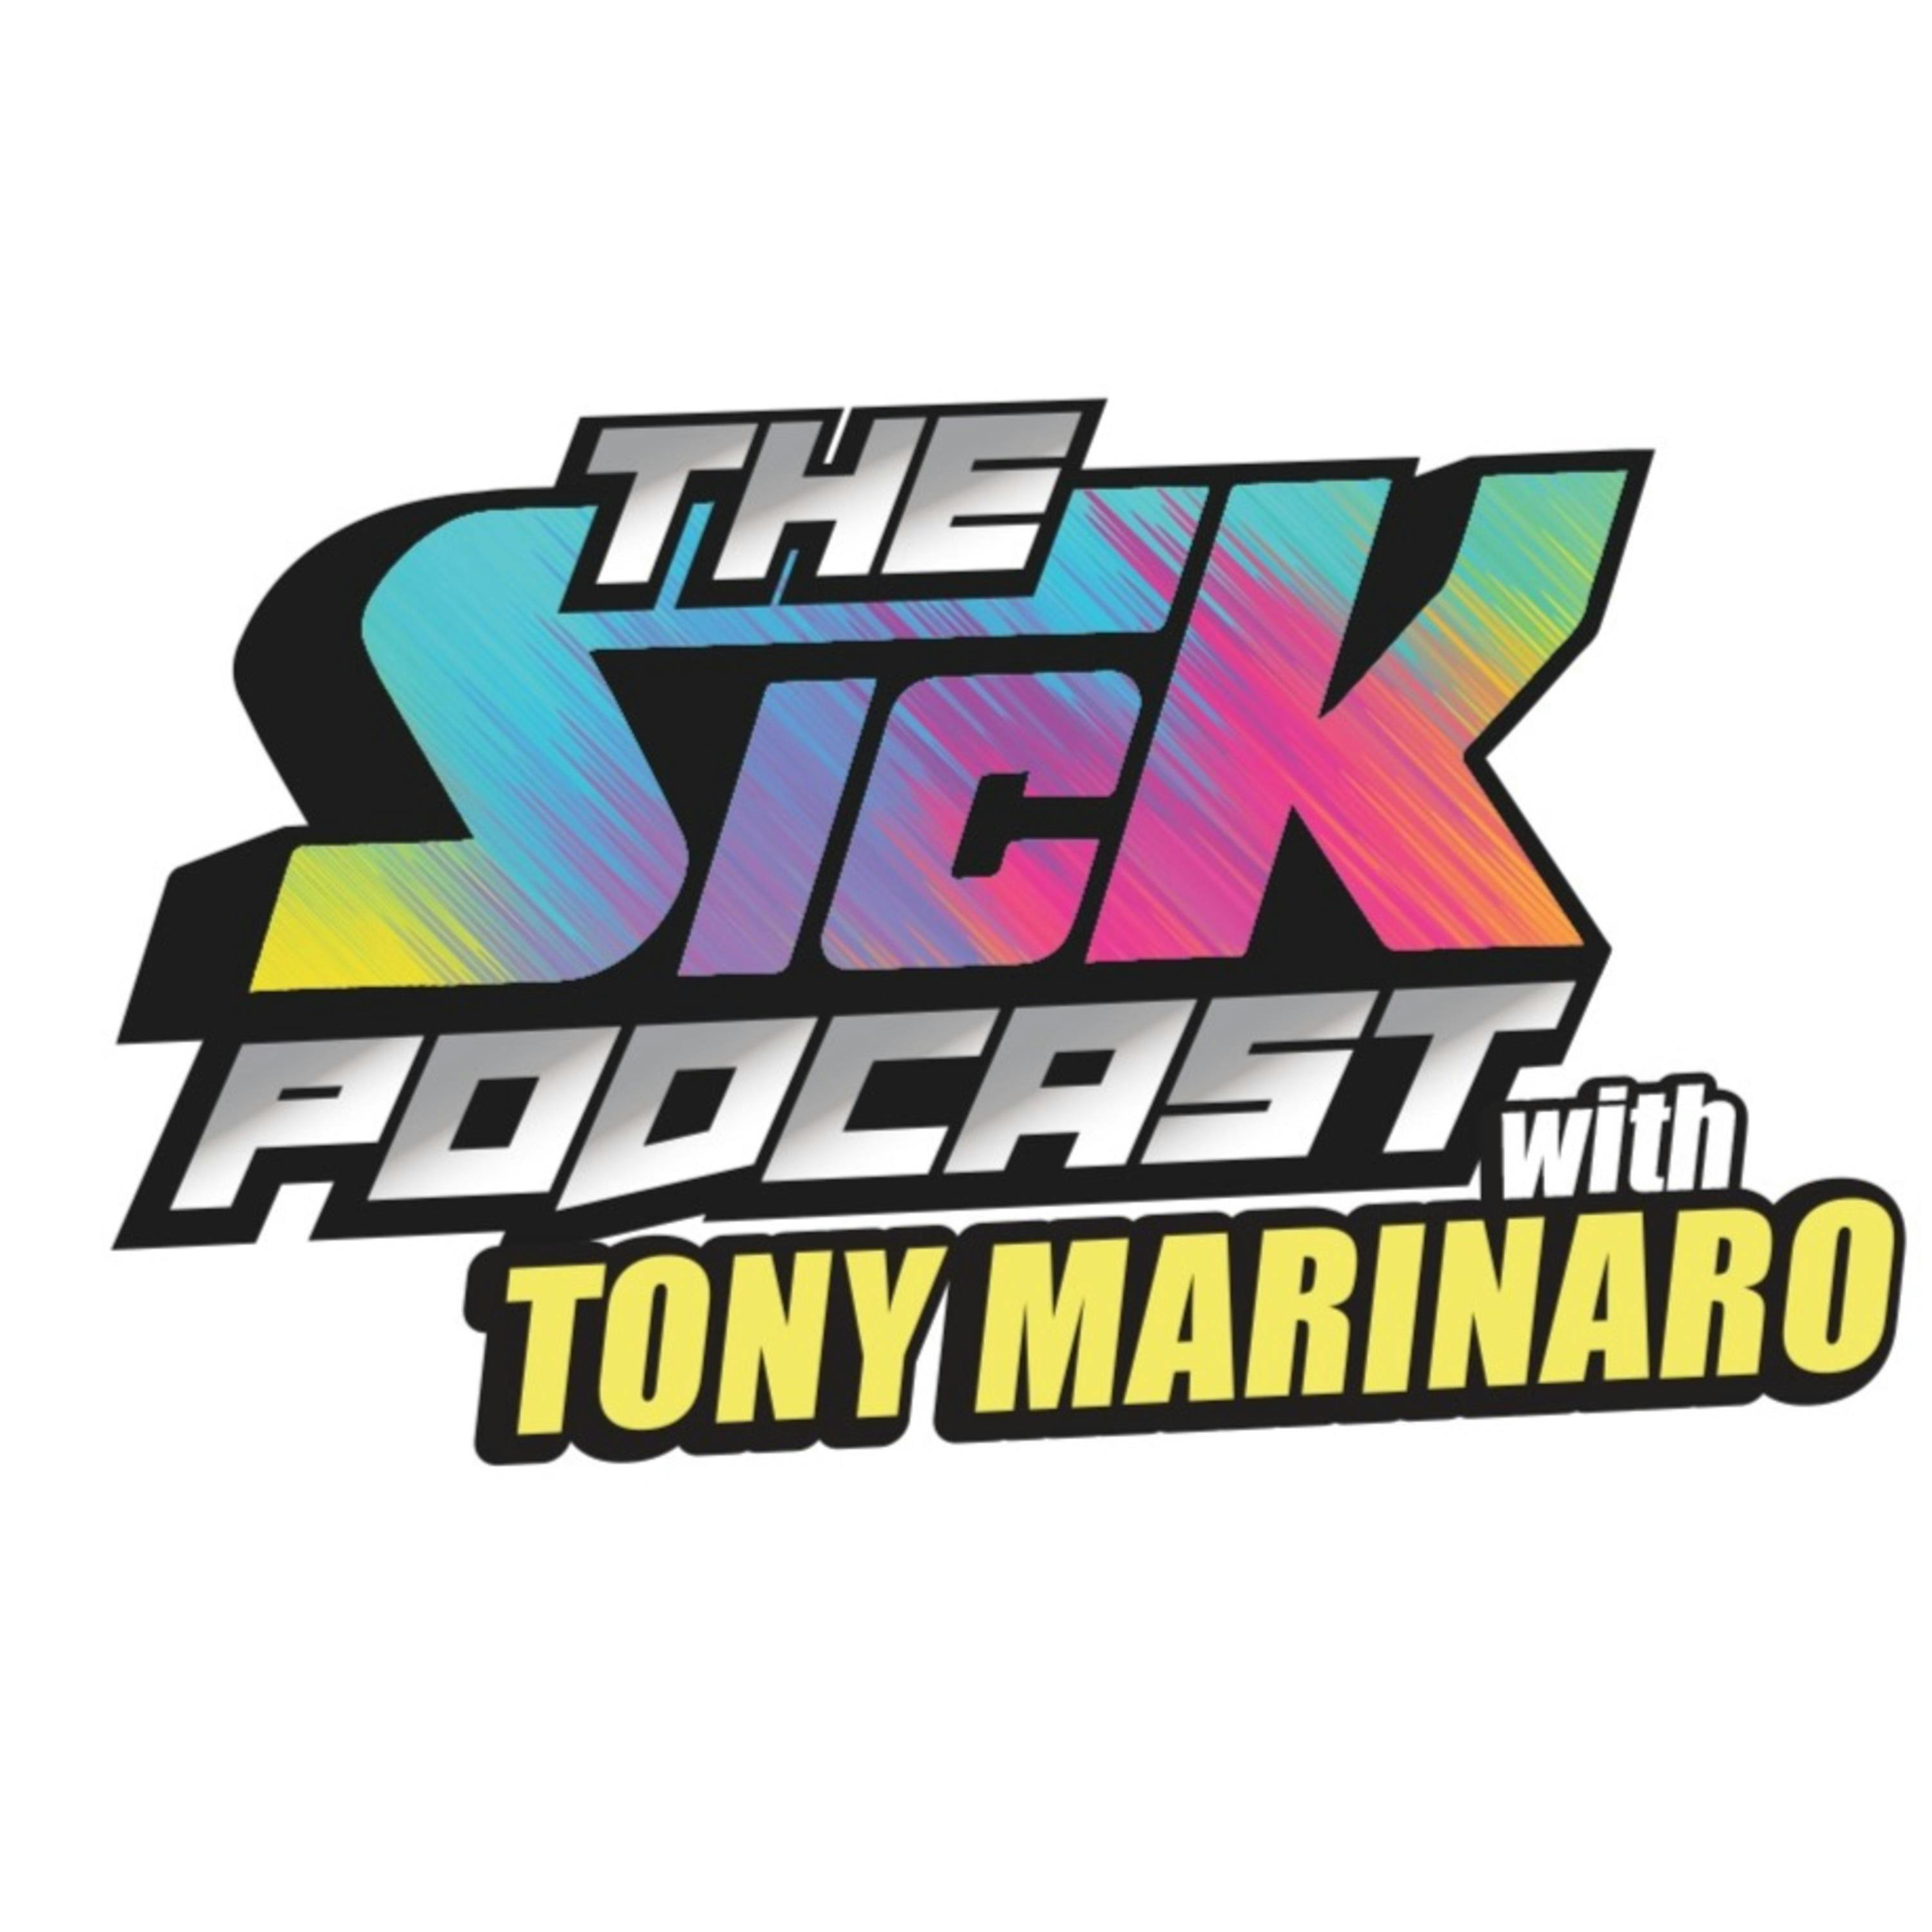 Kirby Dach Has Arrived! | The Sick Podcast with Matt Ohayon January 27 2023